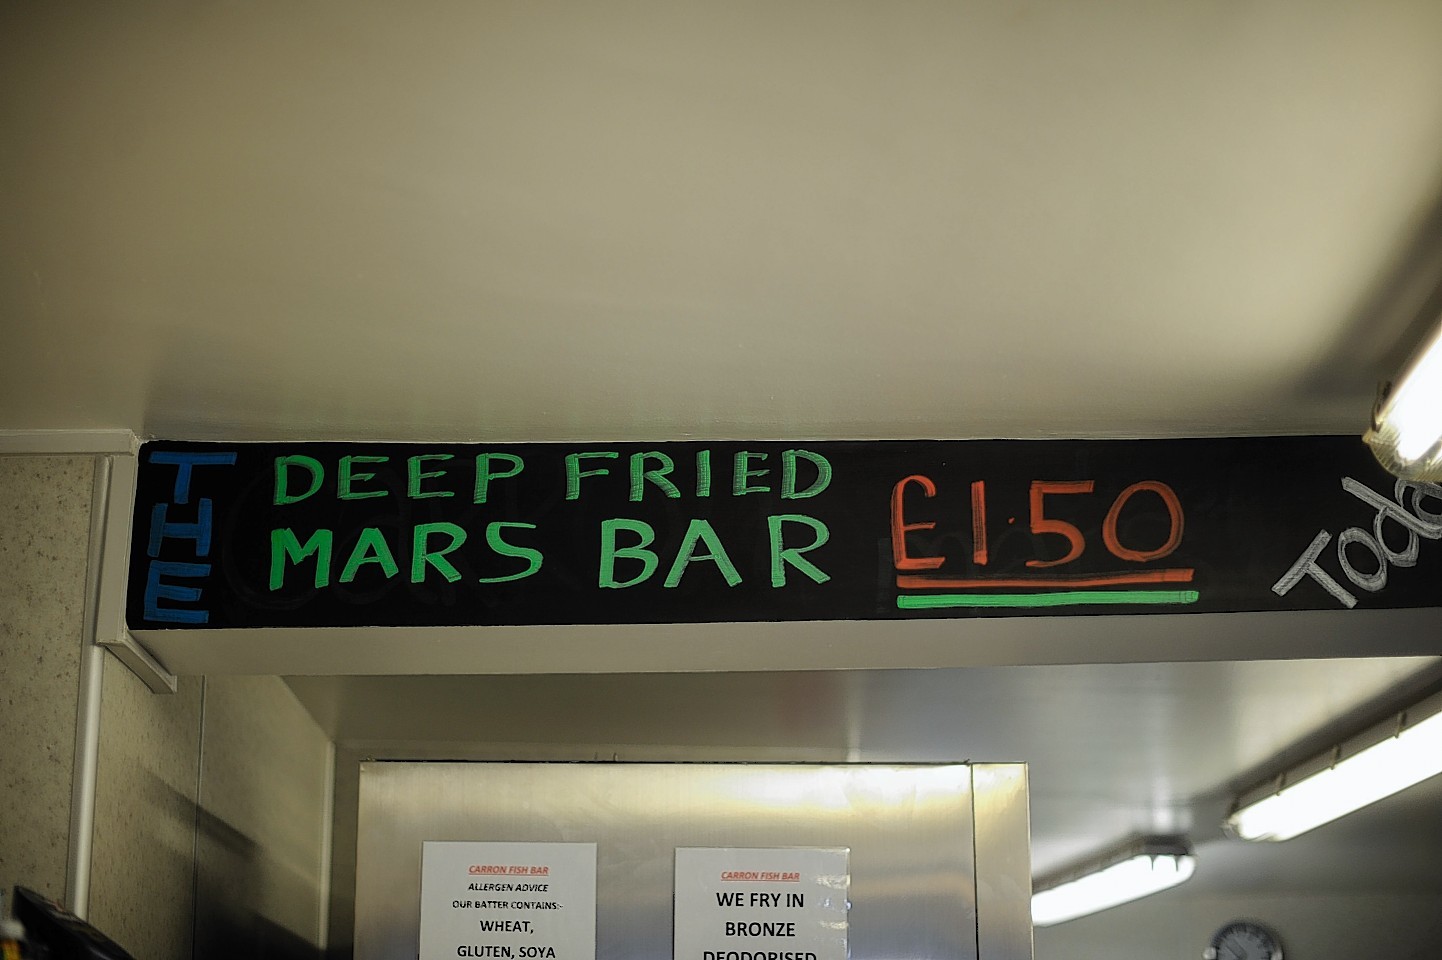 Fancy your Mars Bar deep fried? That will be £1.50